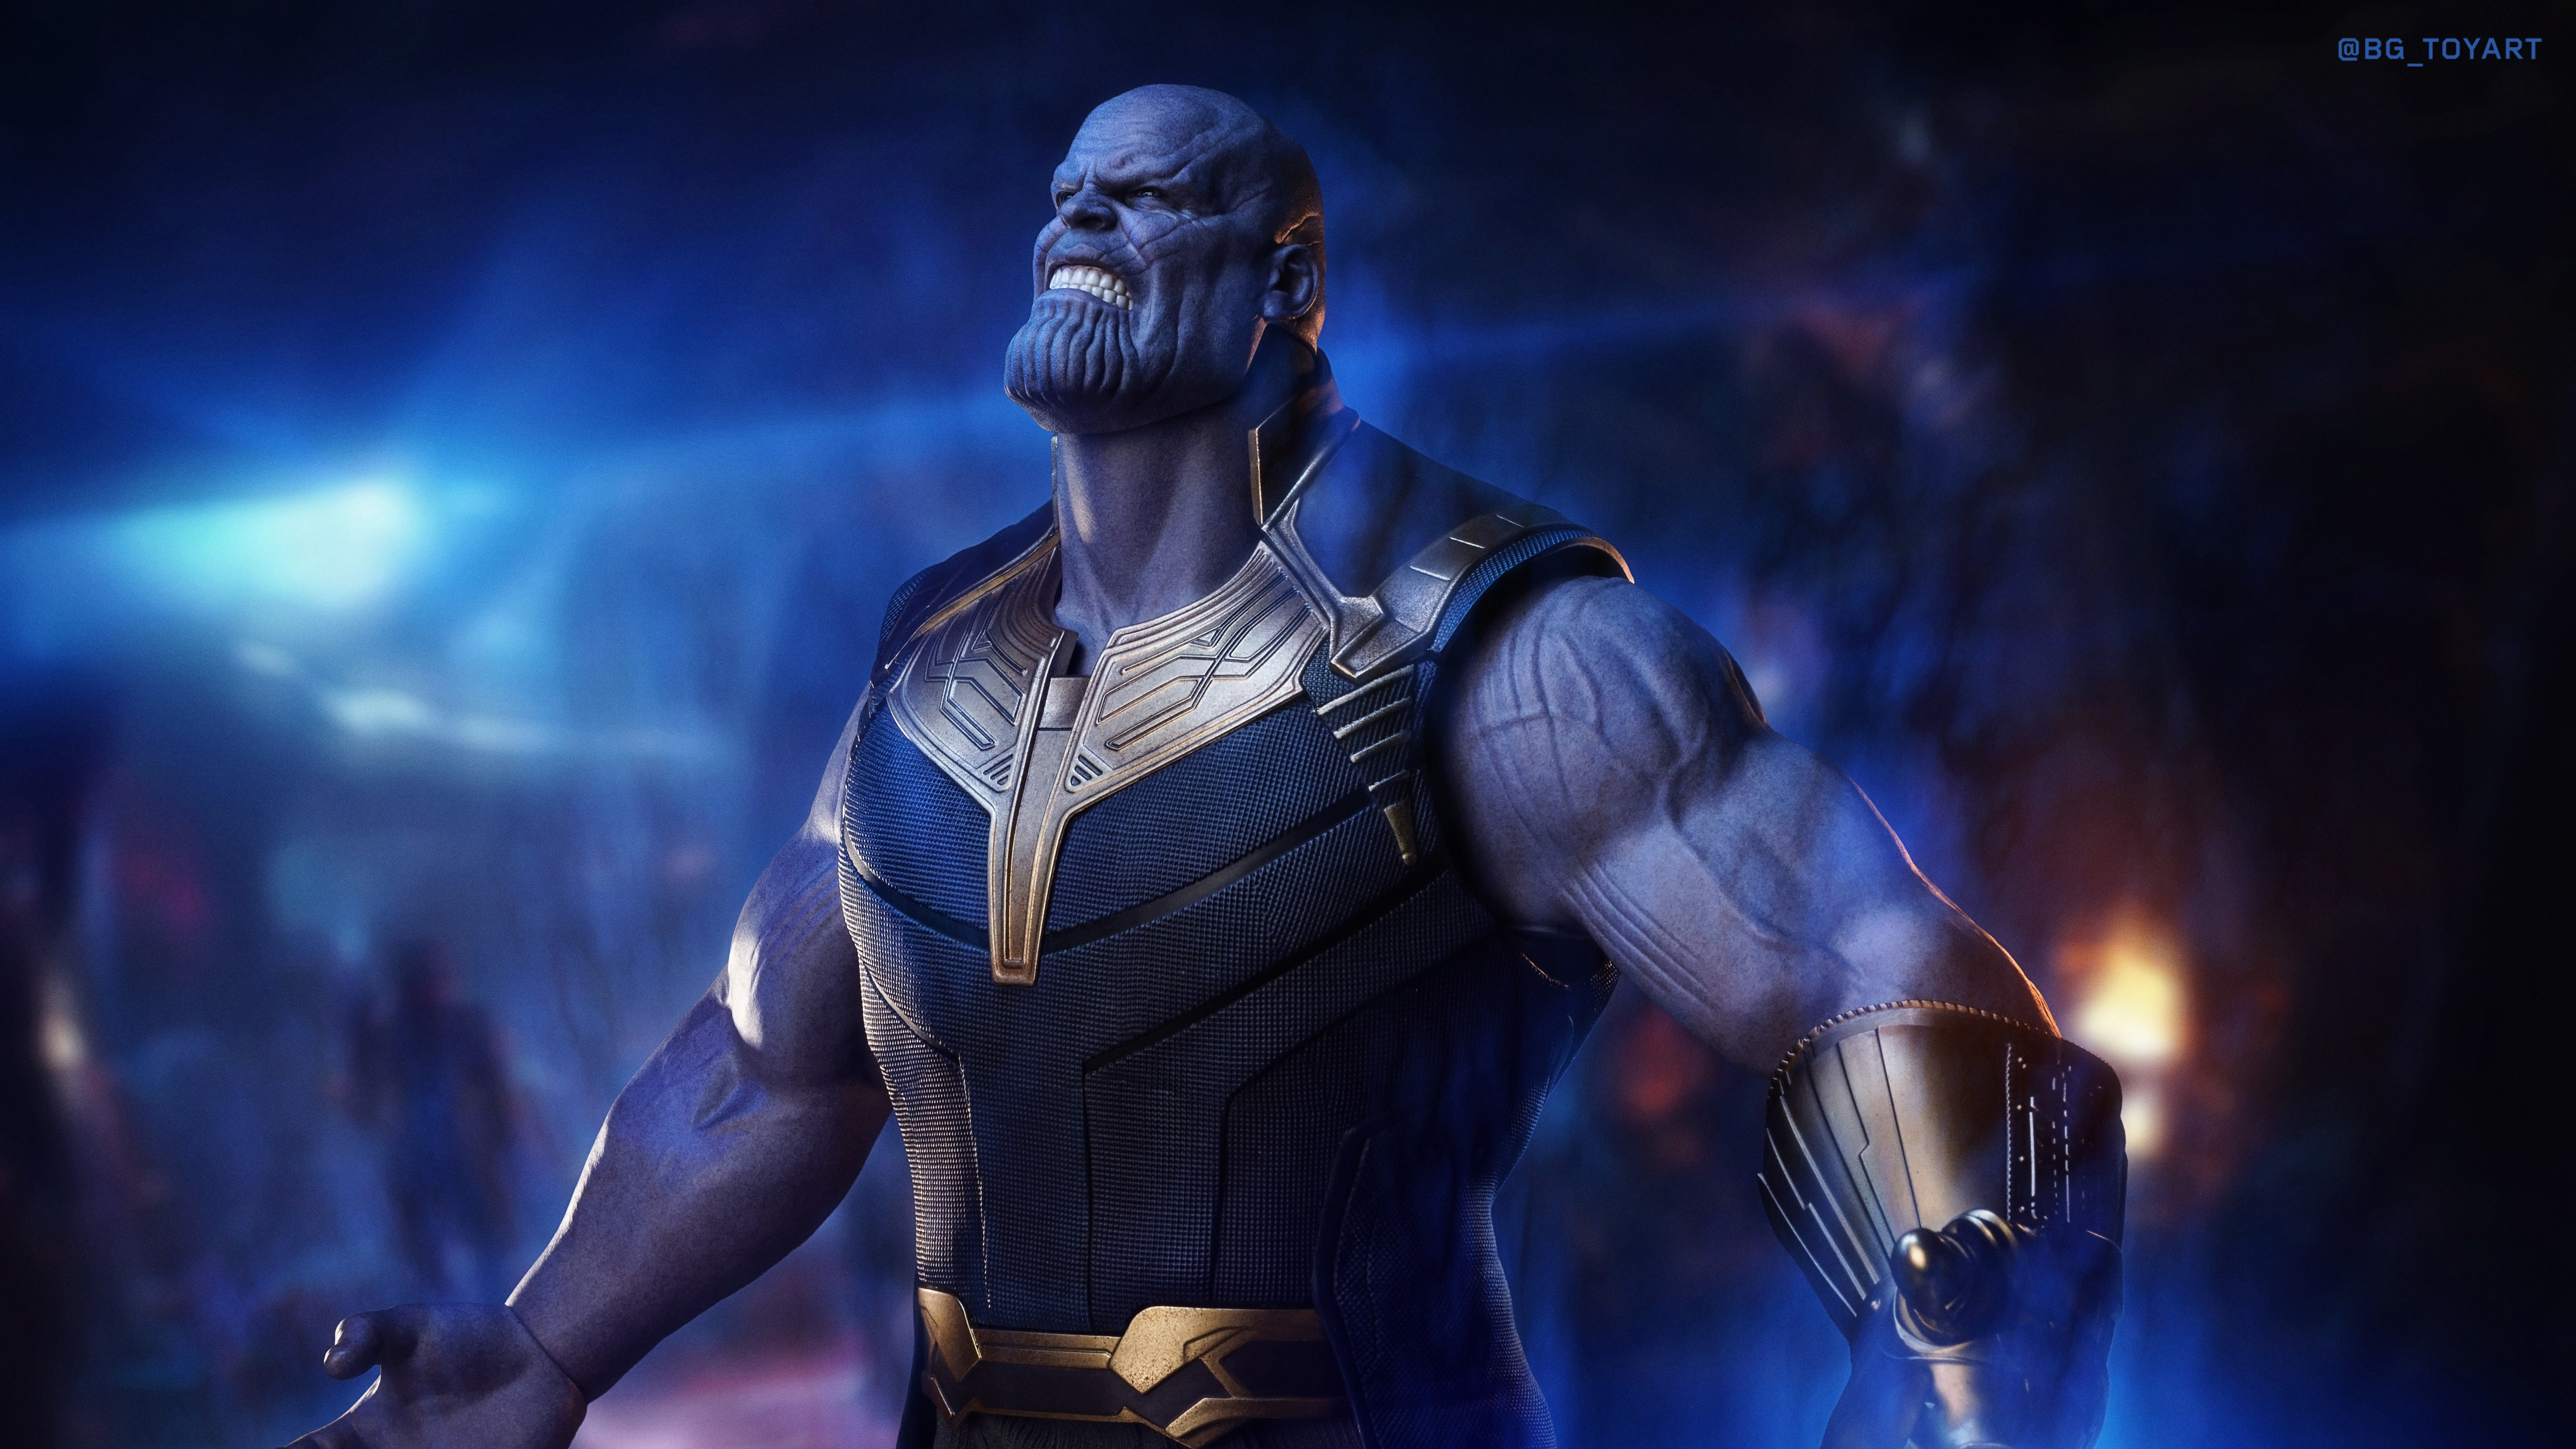  Thanos  in Infinity War Wallpaper  HD  Movies 4K  Wallpapers  